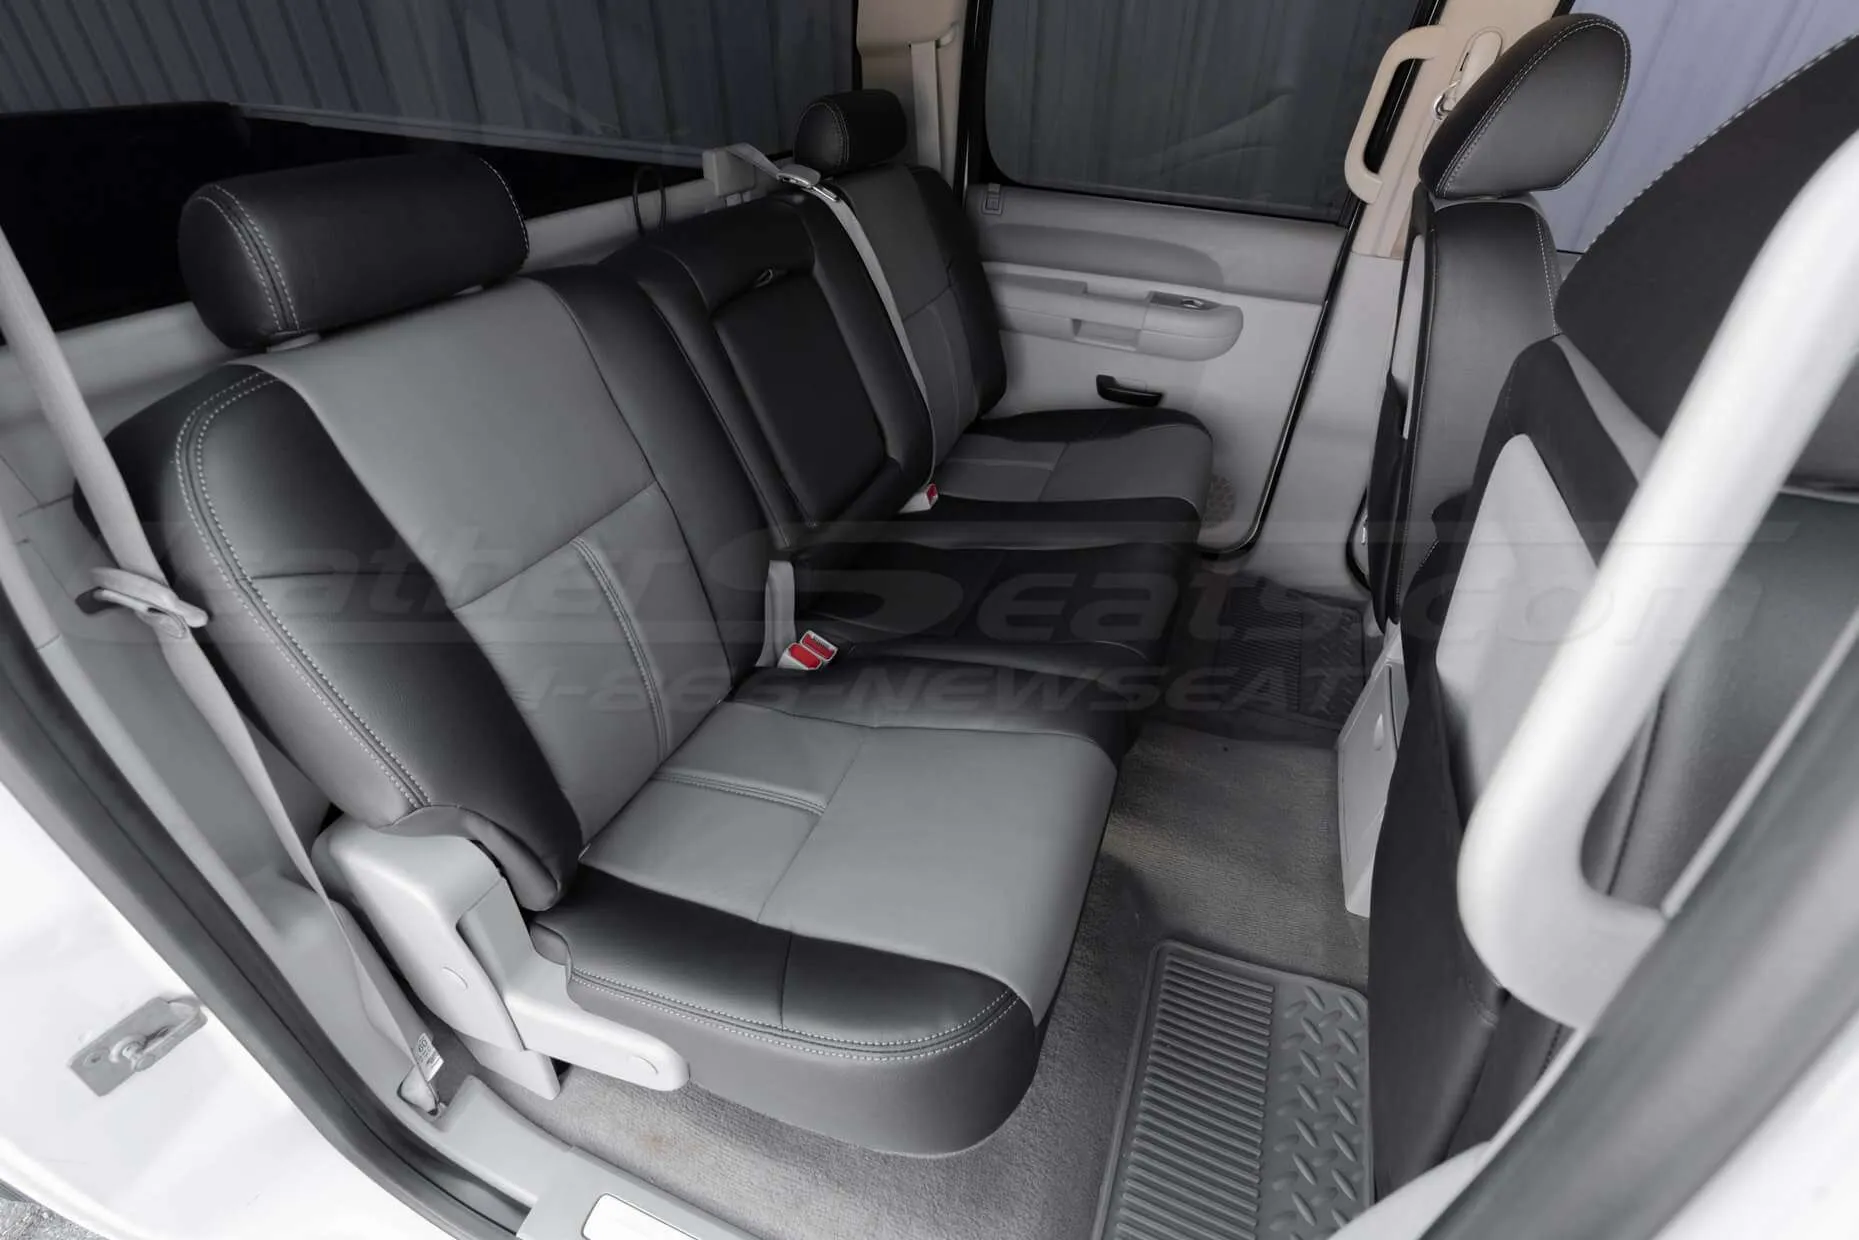 Black and Light Grey GMC Sierra Leather Seats - Rear seats installed